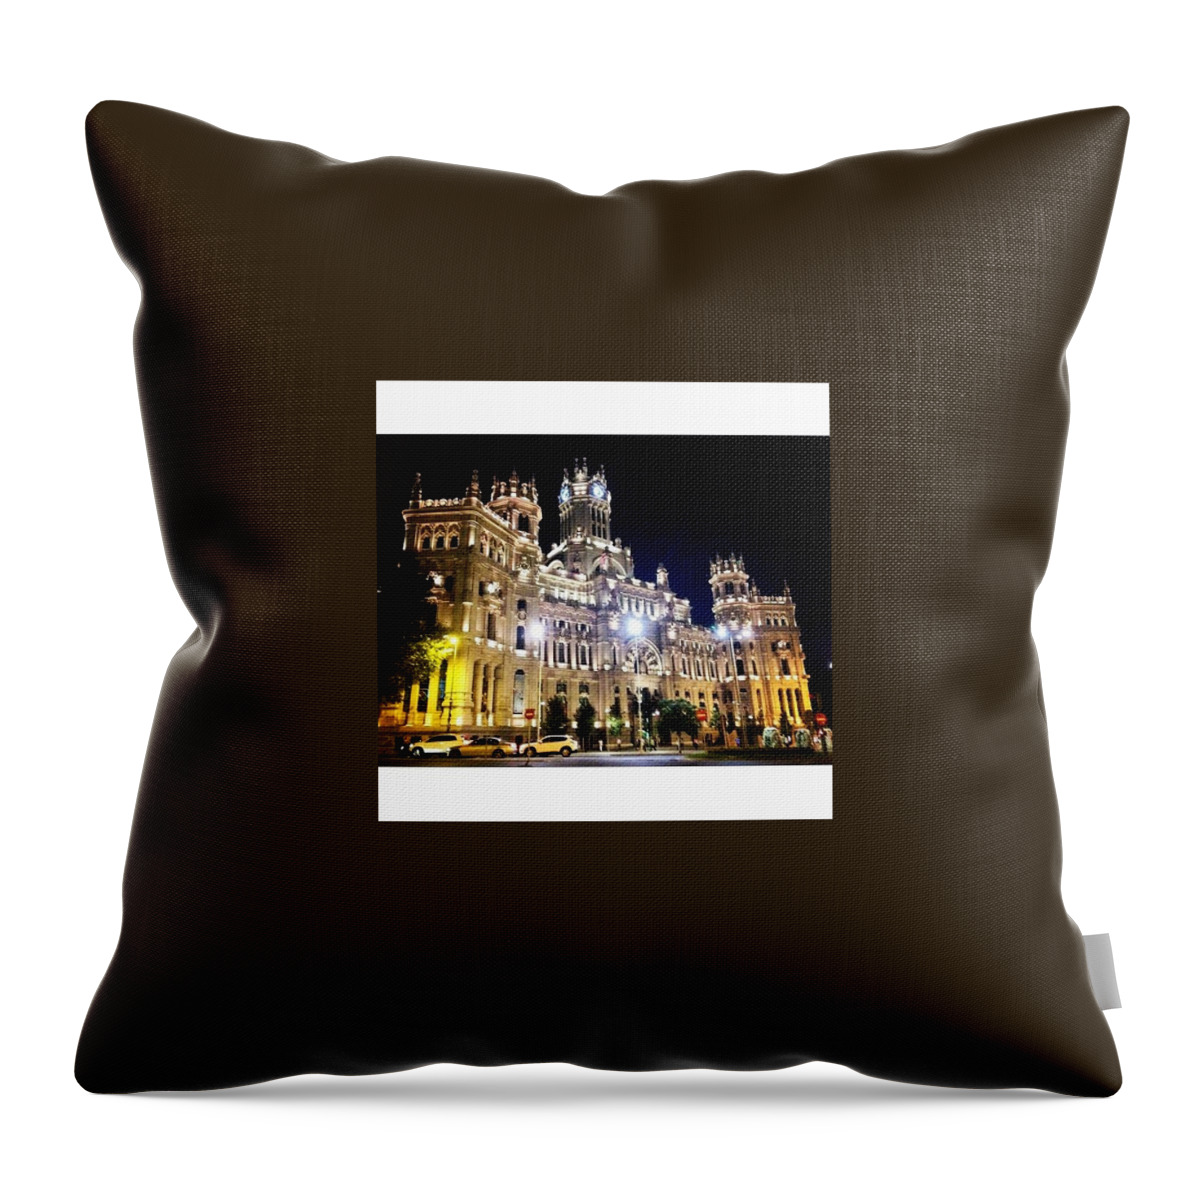 Madrid Throw Pillow featuring the photograph Building by Korcan Uster